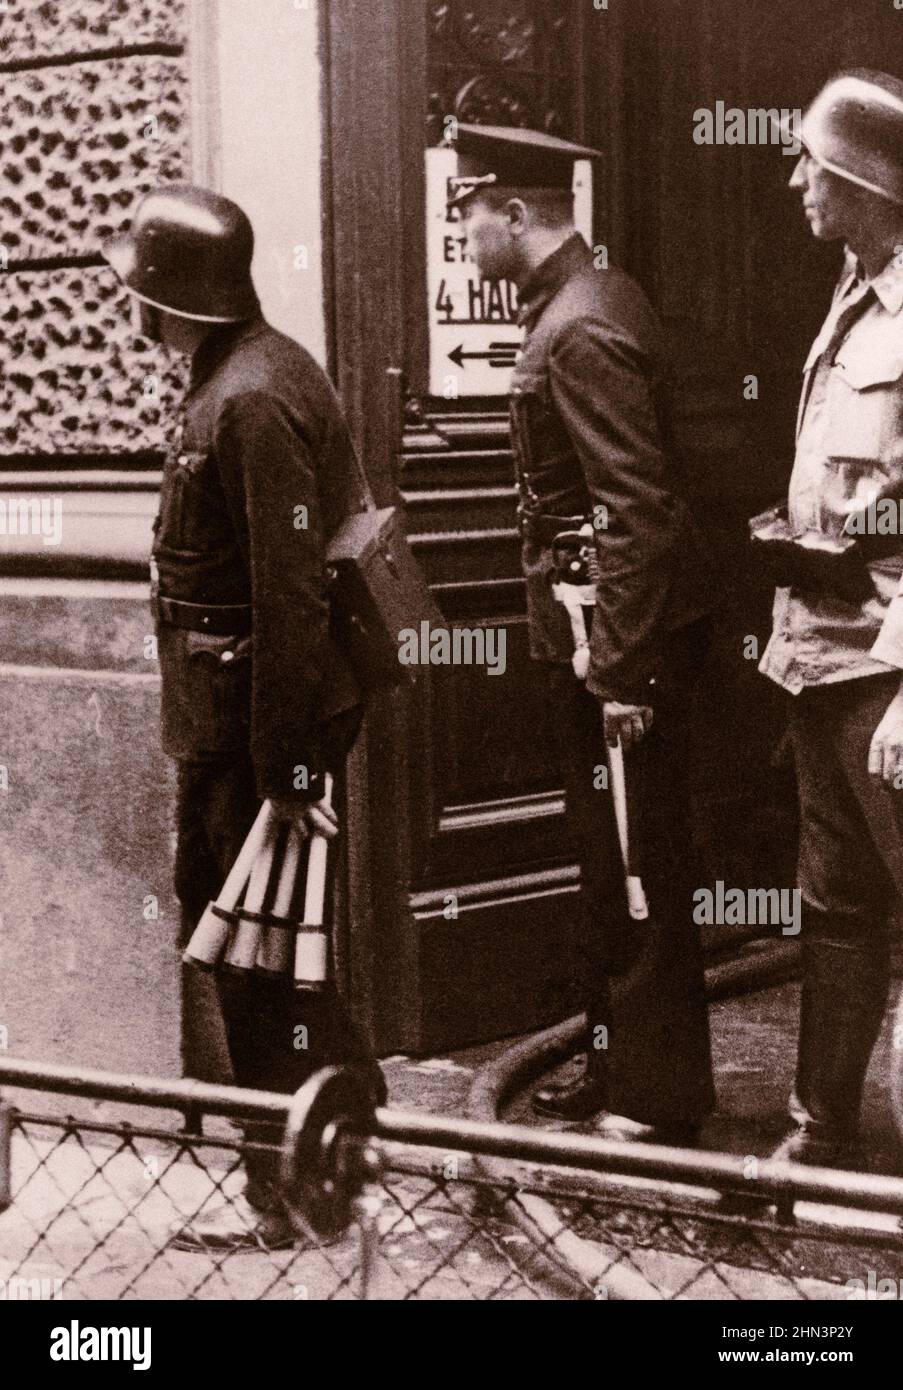 The Nazi putsch in Vienna (July Putsch) and the assassination of Chancellor Engelbert Dollfuss. Austria, 1934 Police officers armed with breech-loadin Stock Photo